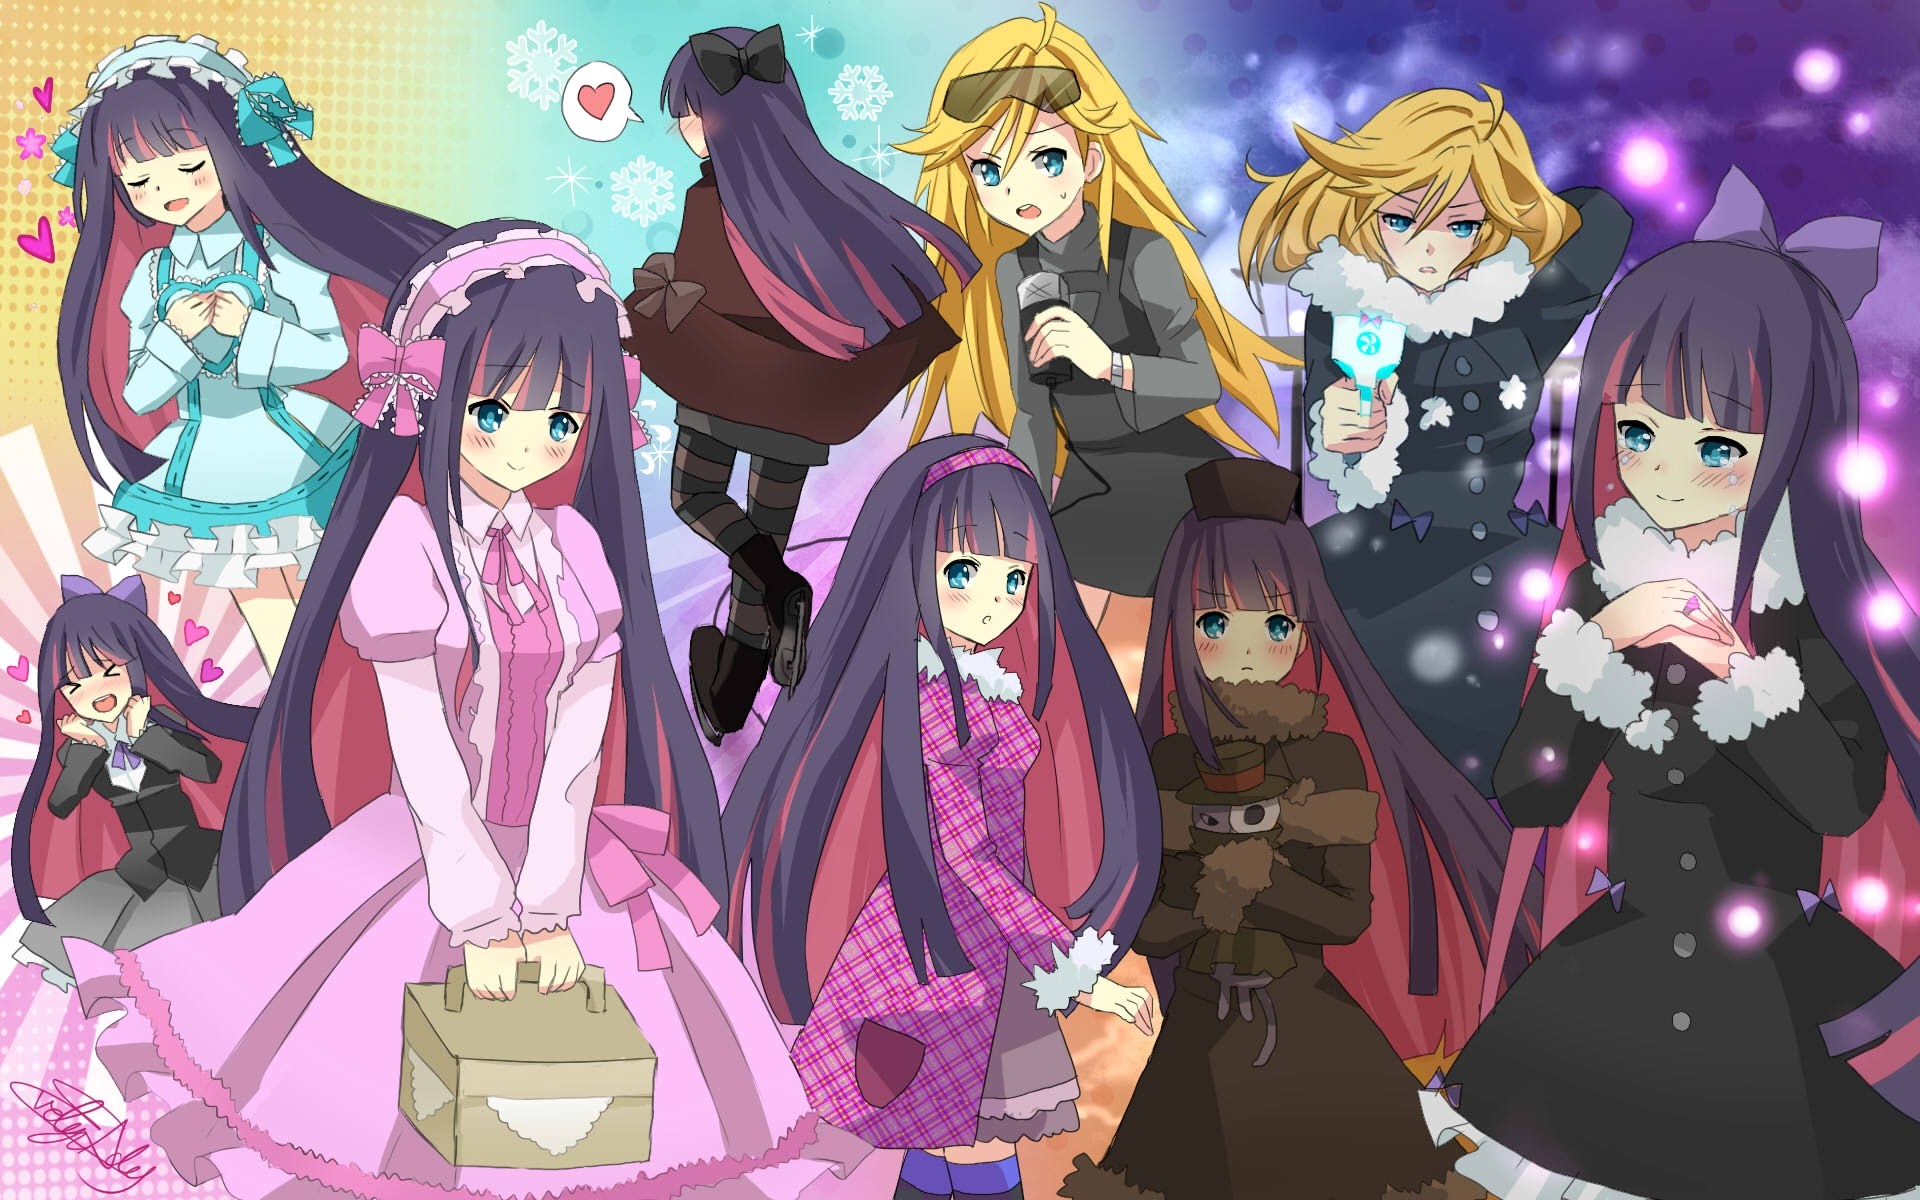 1920x1200 View Fullsize Panty and Stocking With Garterbelt Image